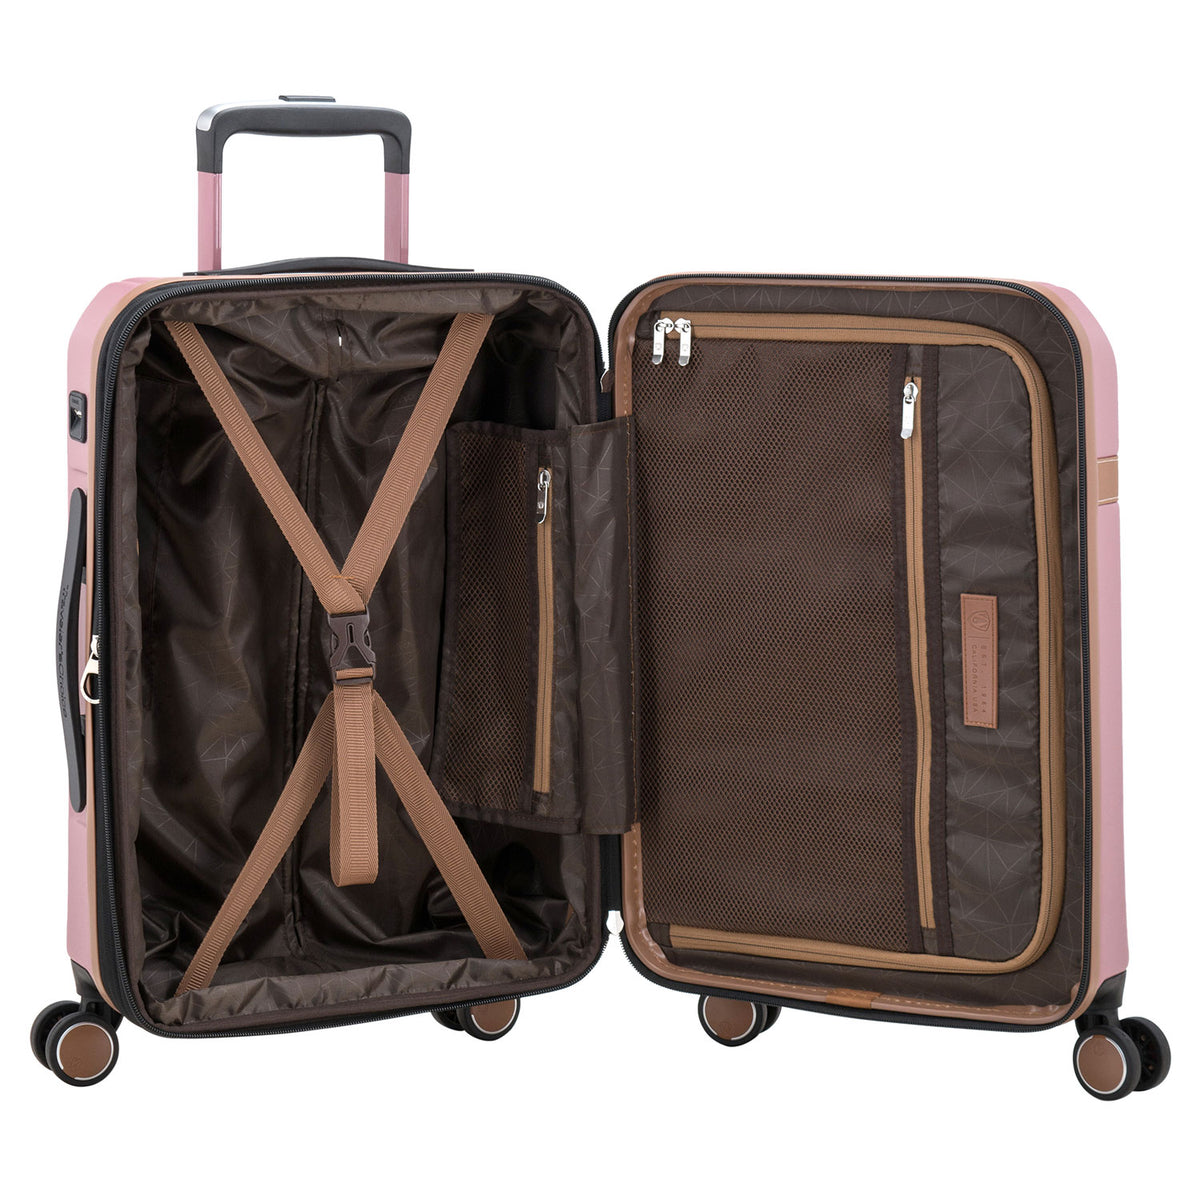 Candlewood 3 Piece Luggage Suitcase Set with 4 Spinner Wheels | Carry ...